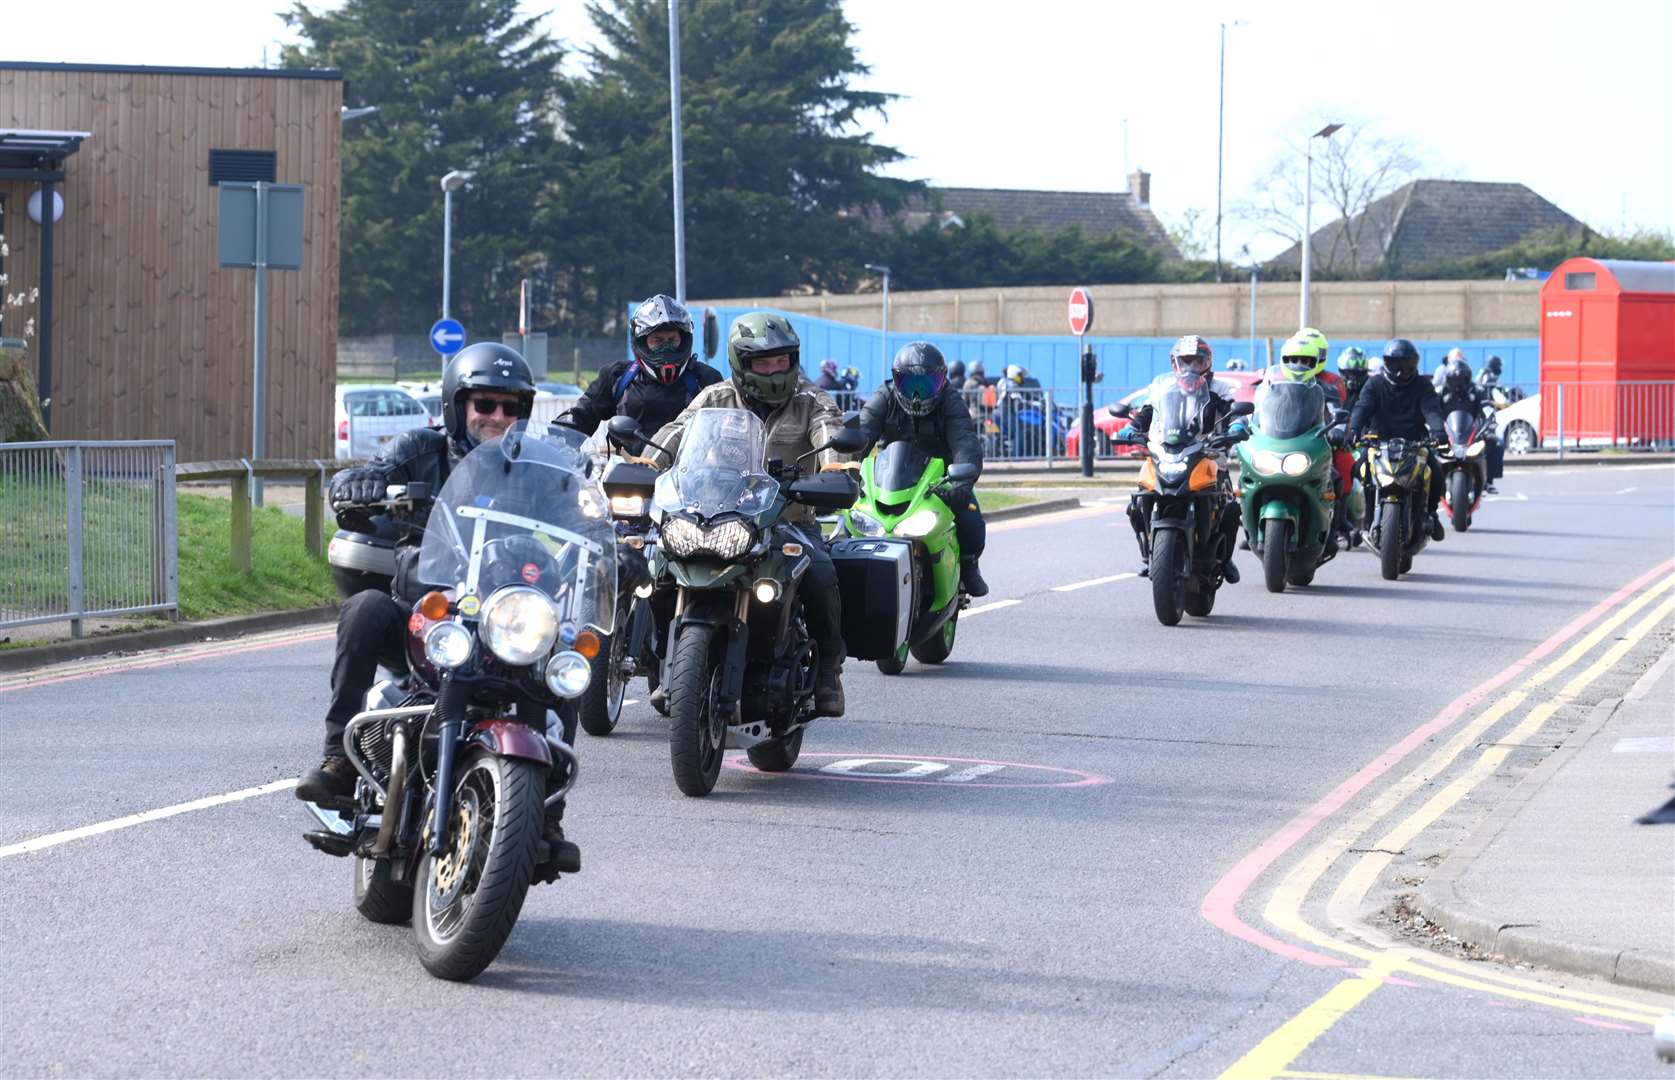 Freewheel cruise riders association delivering East Eggs to children at QEH